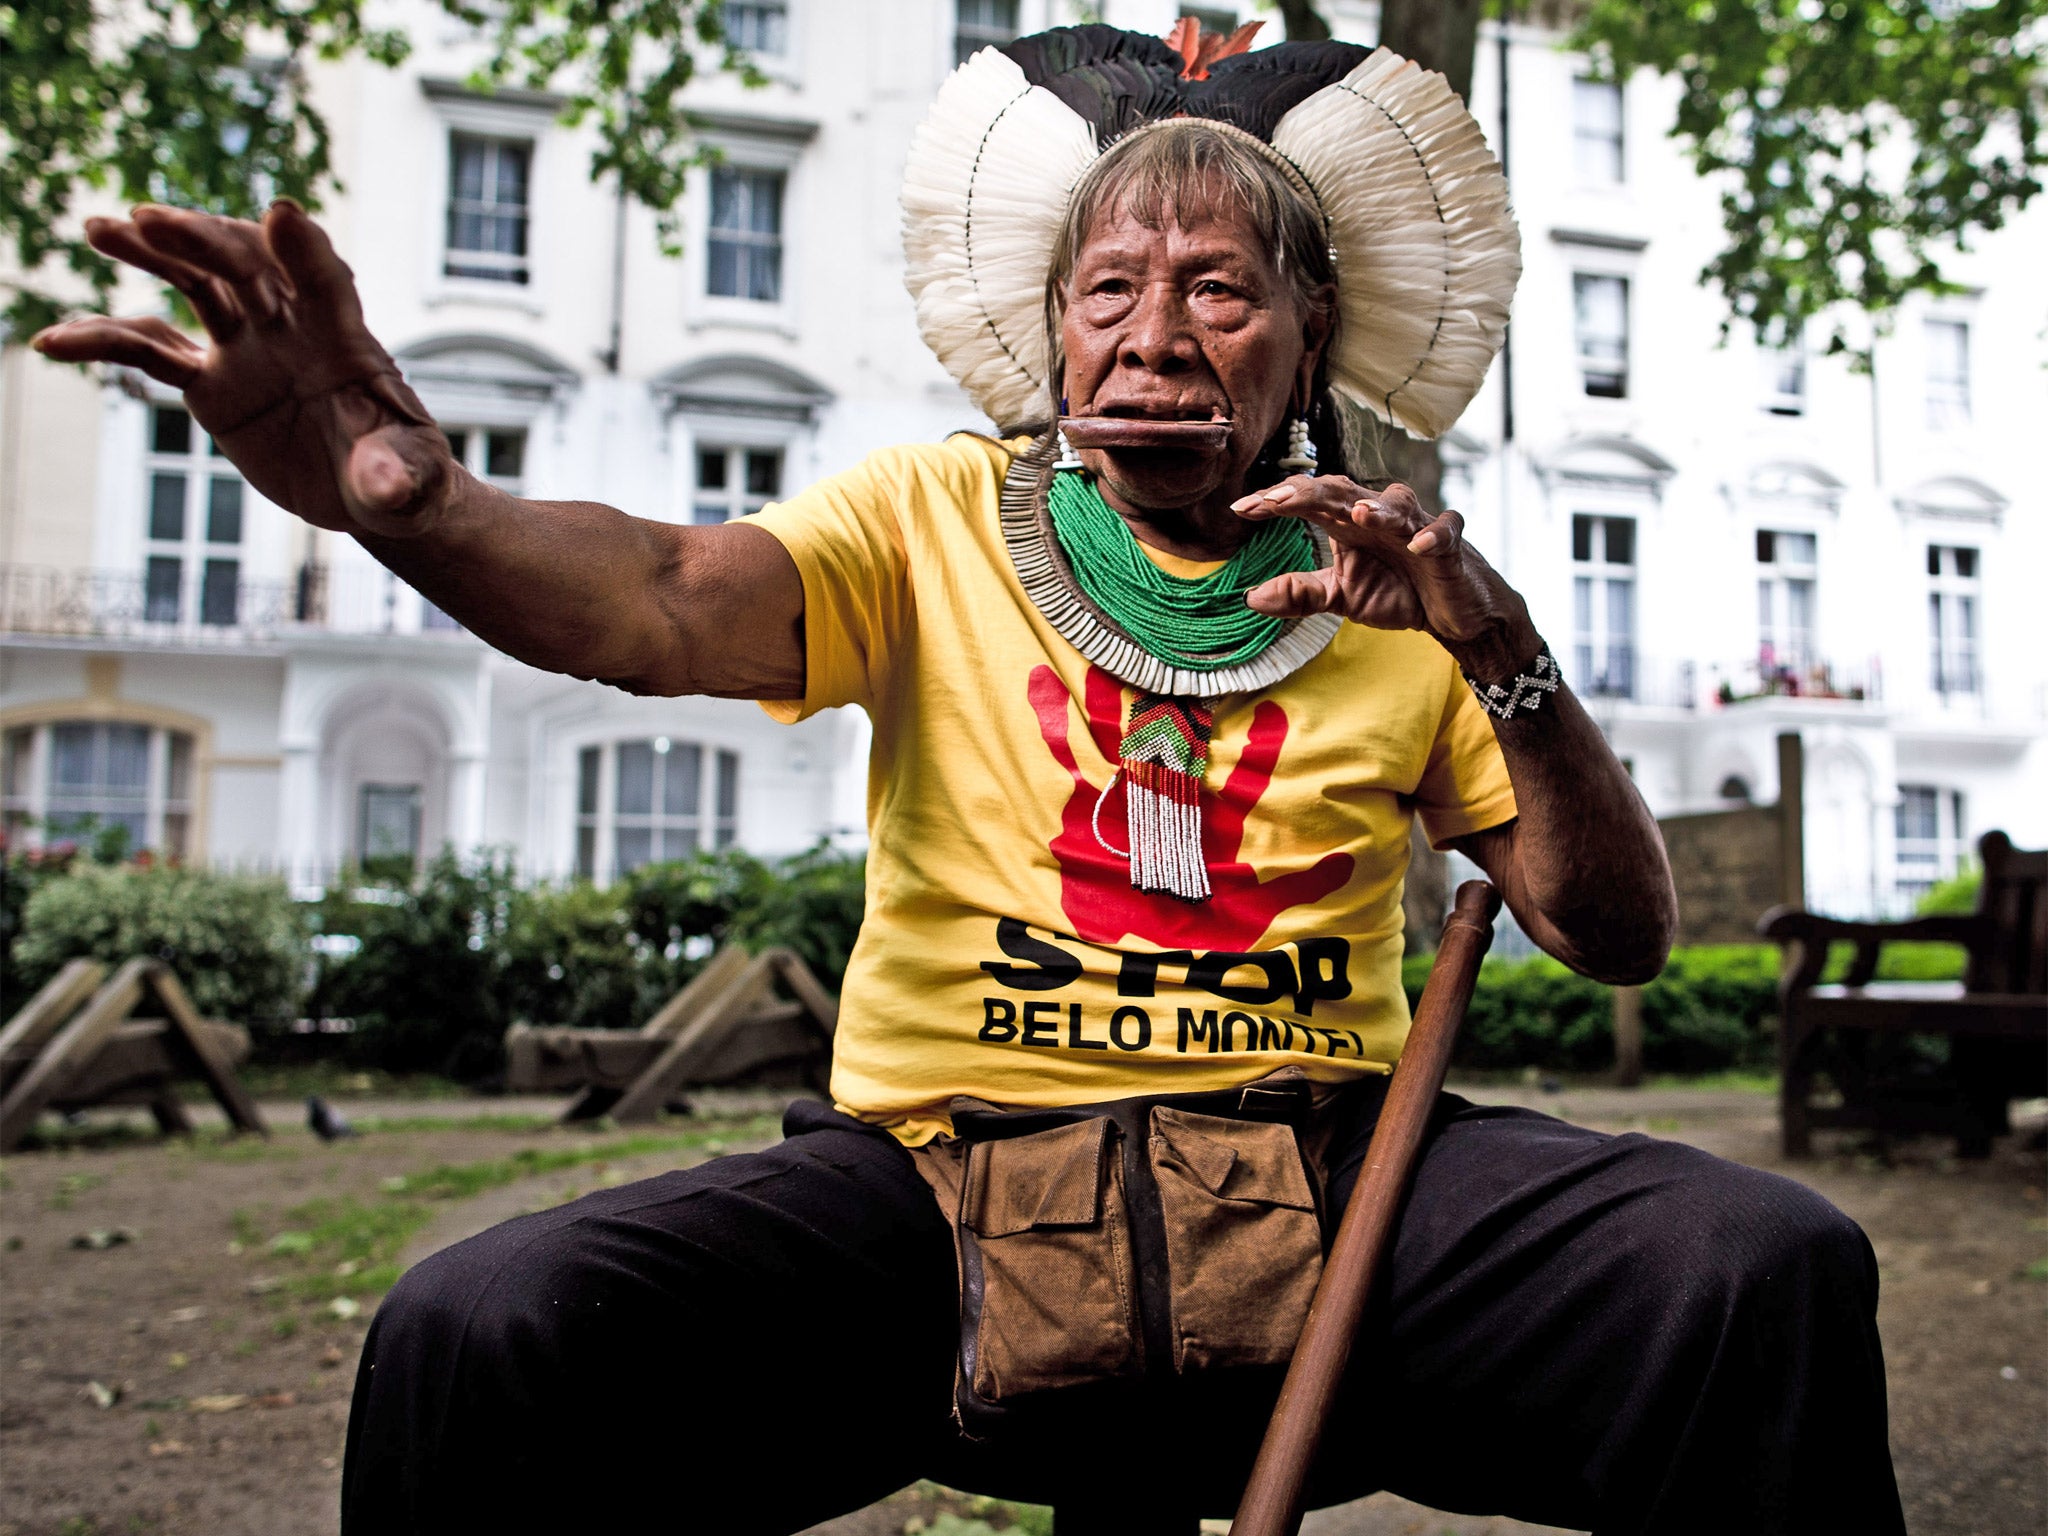 Raoni Metuktire is in the UK to highlight the plight of the Brazilian rainforest